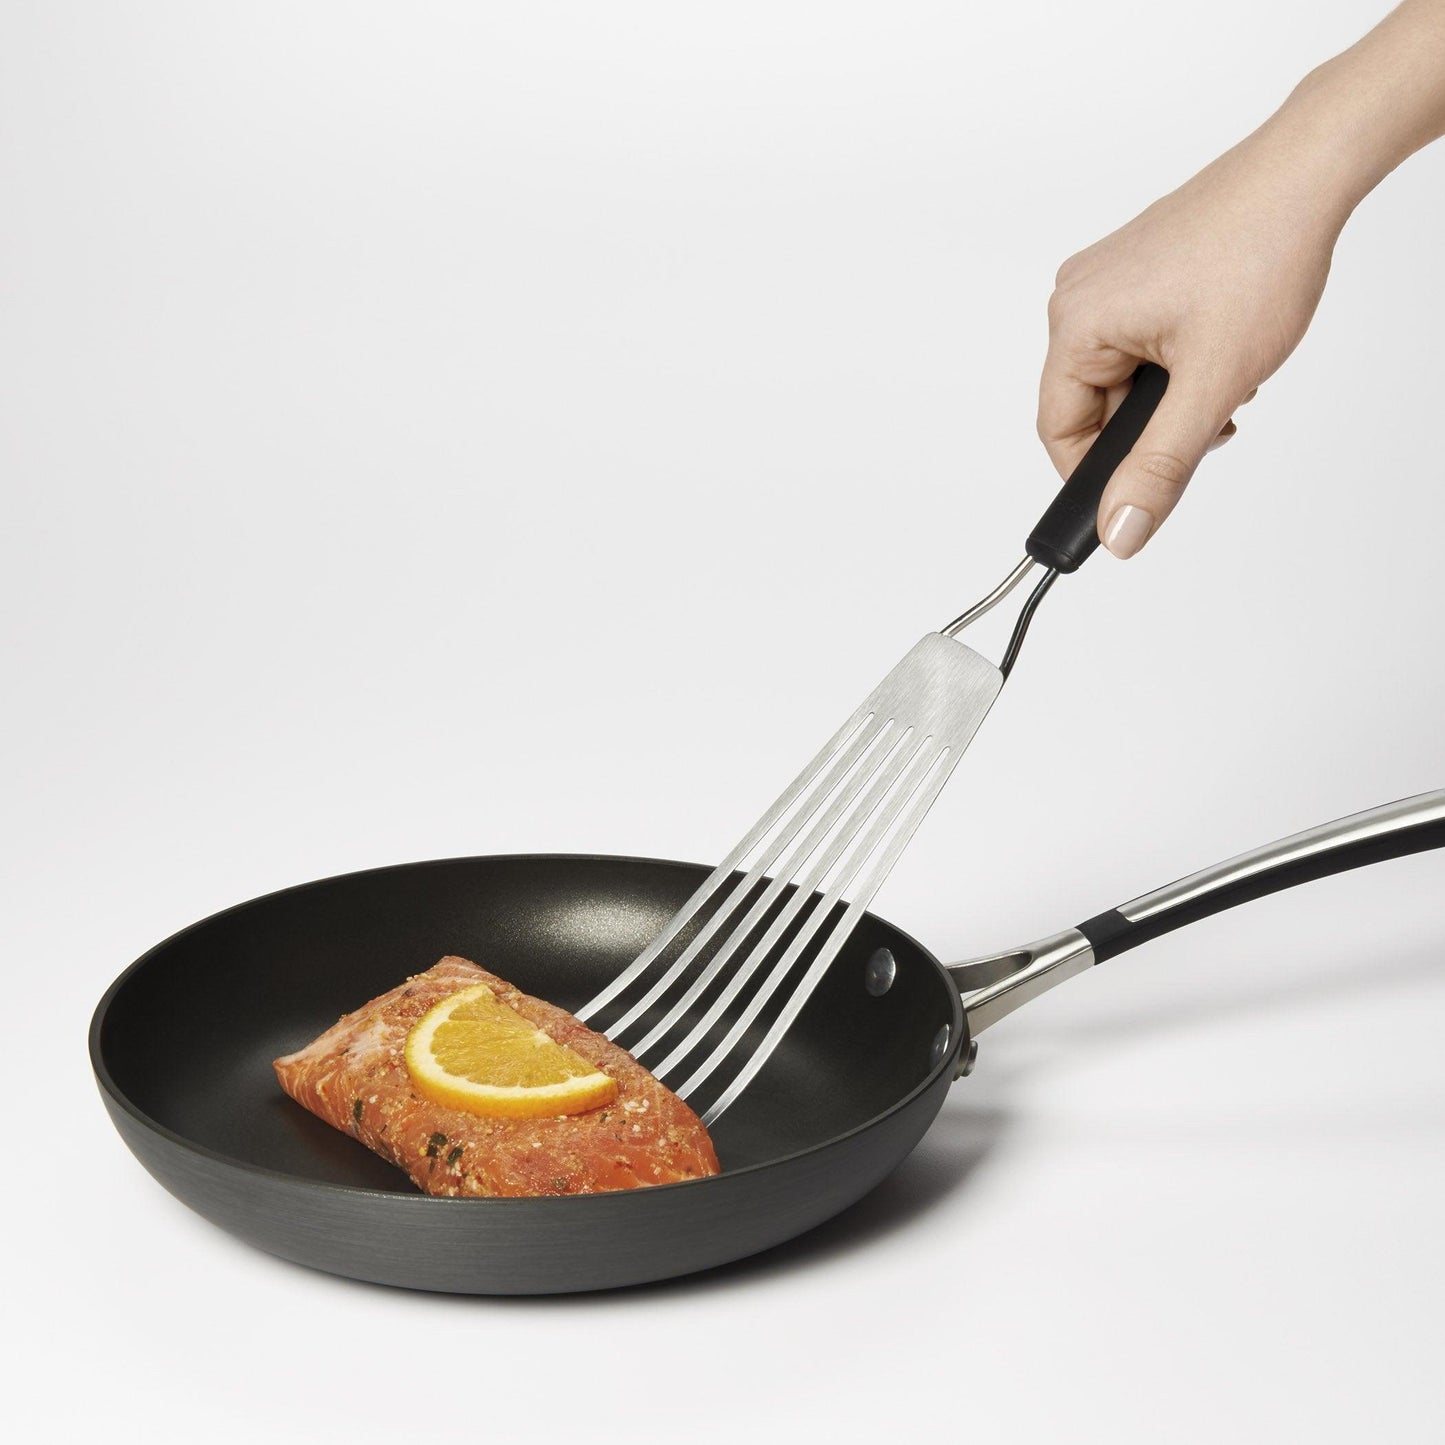 OXO Good Grips Stainless Steel Fish Turner - CookCave